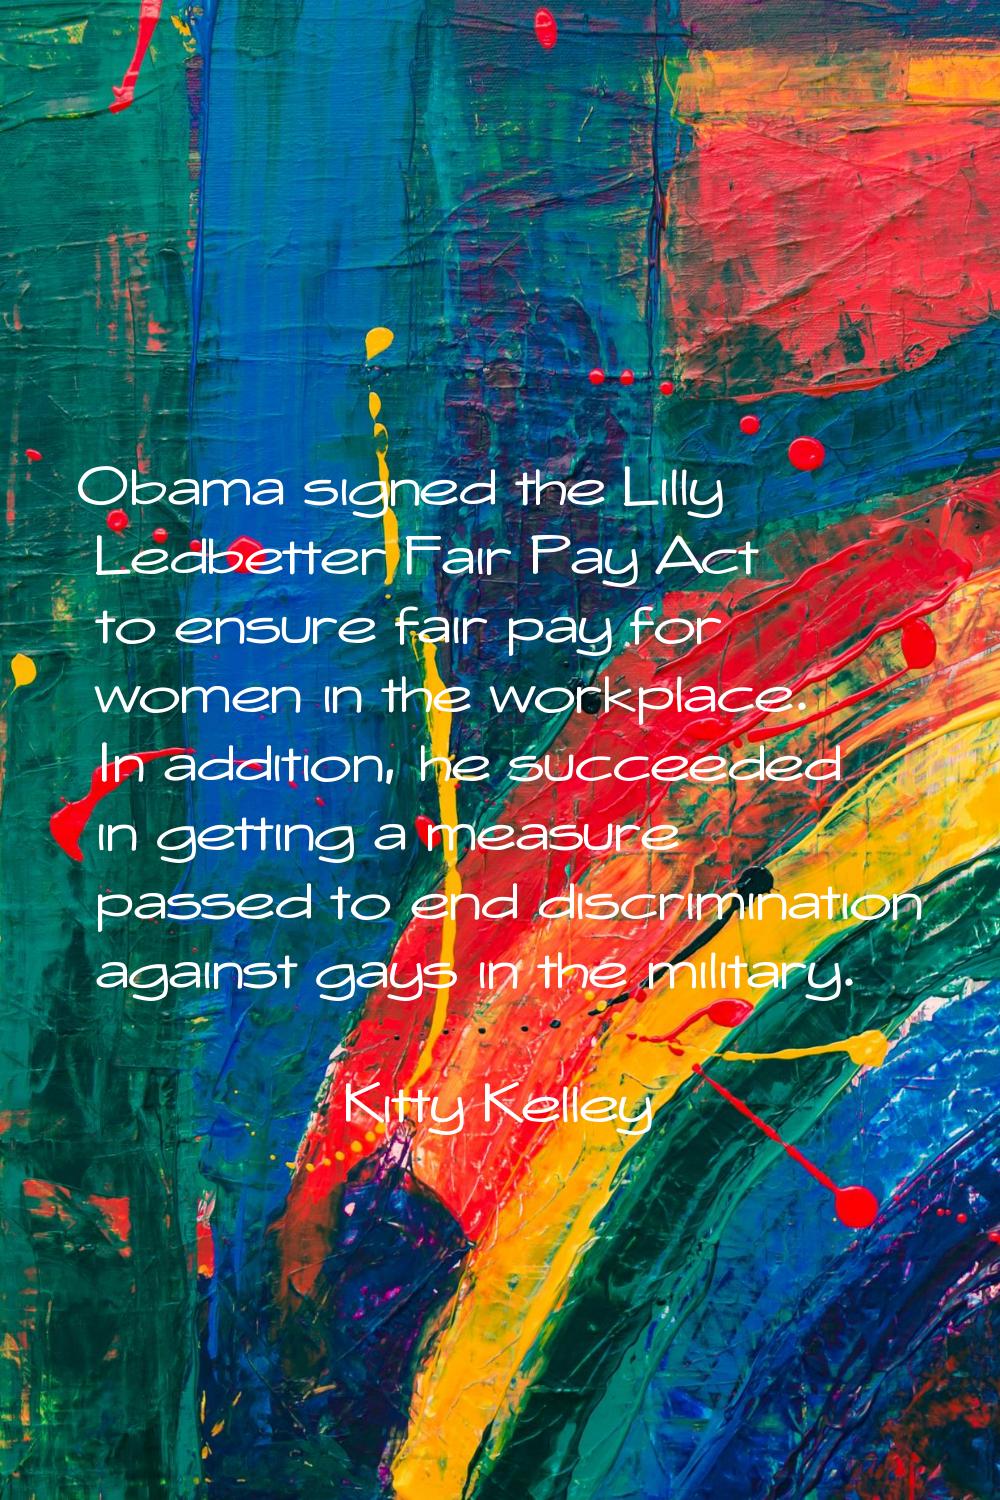 Obama signed the Lilly Ledbetter Fair Pay Act to ensure fair pay for women in the workplace. In add